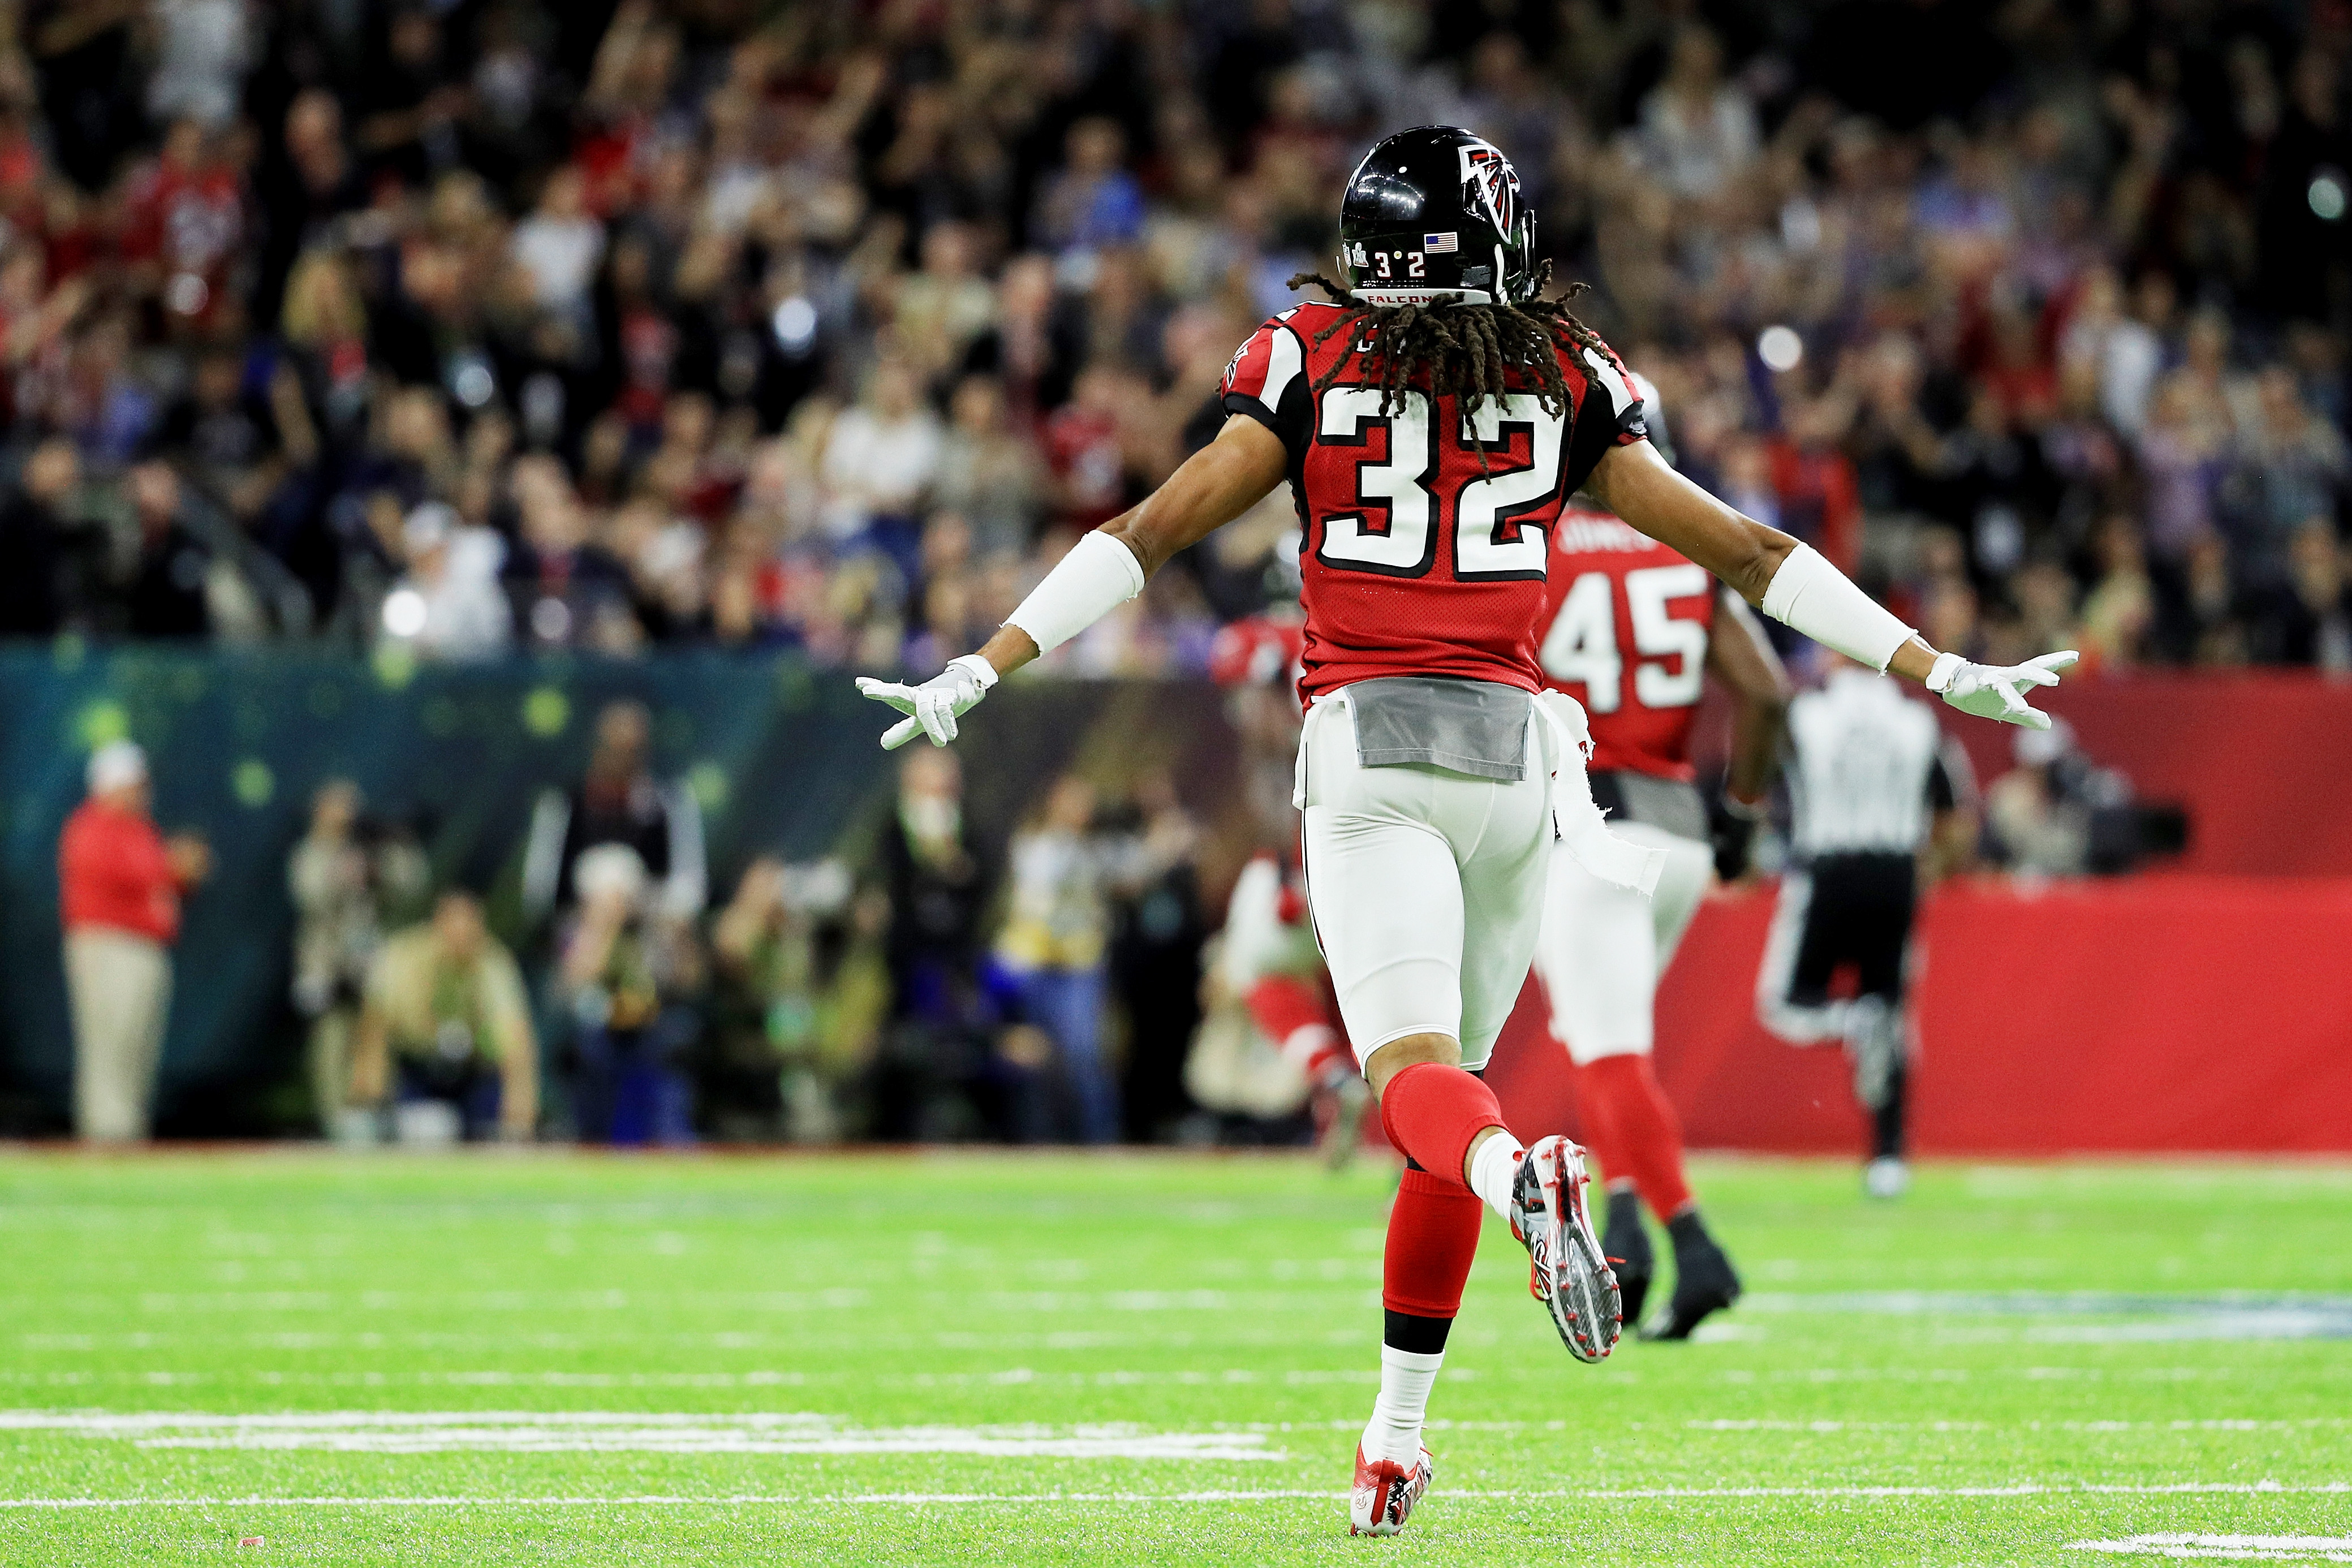 Falcons' Jalen Collins suspended for 10 games